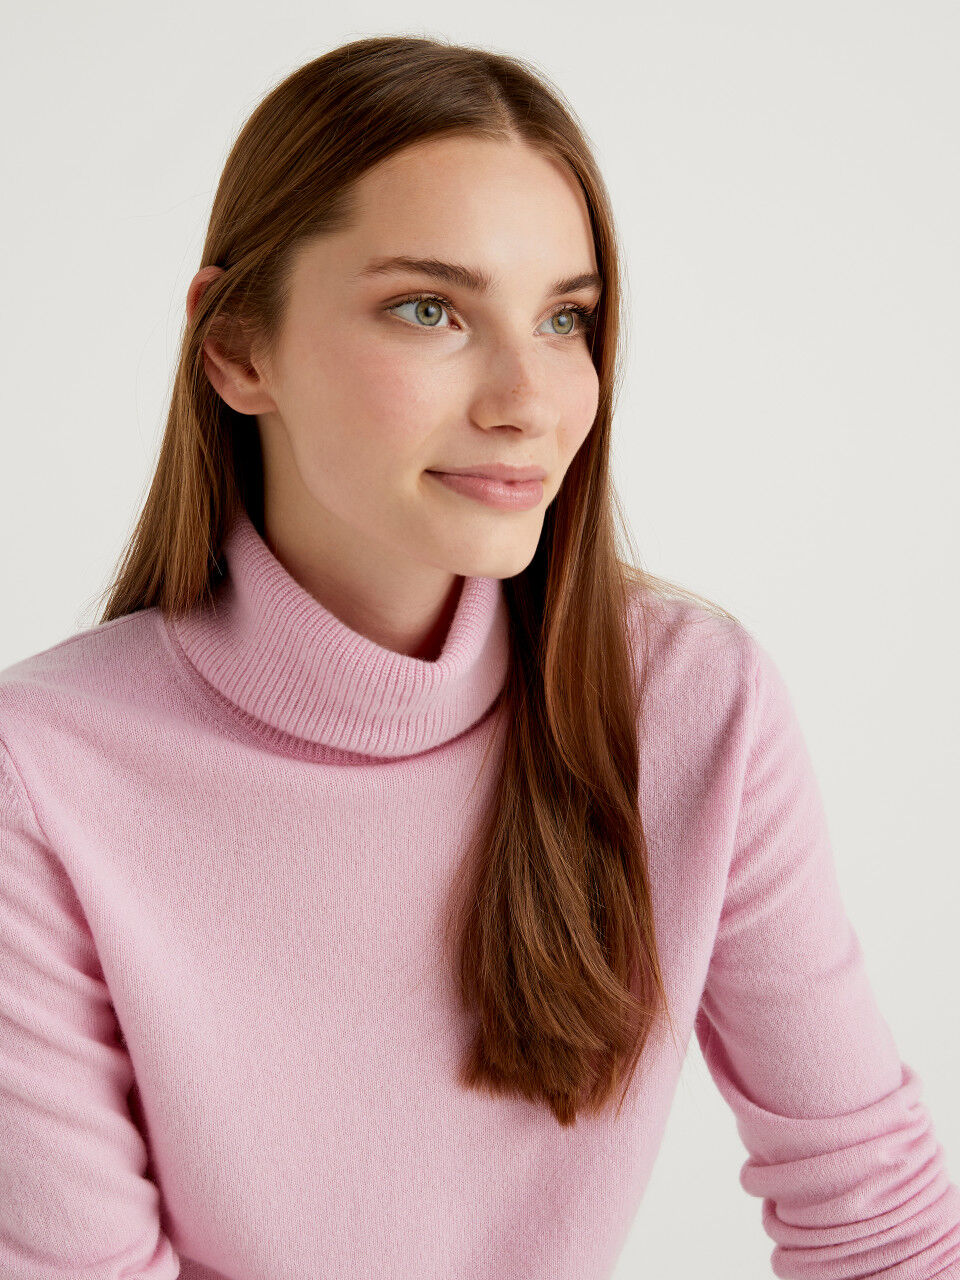 Women's Sweaters and Jumpers New Collection 2022 | Benetton